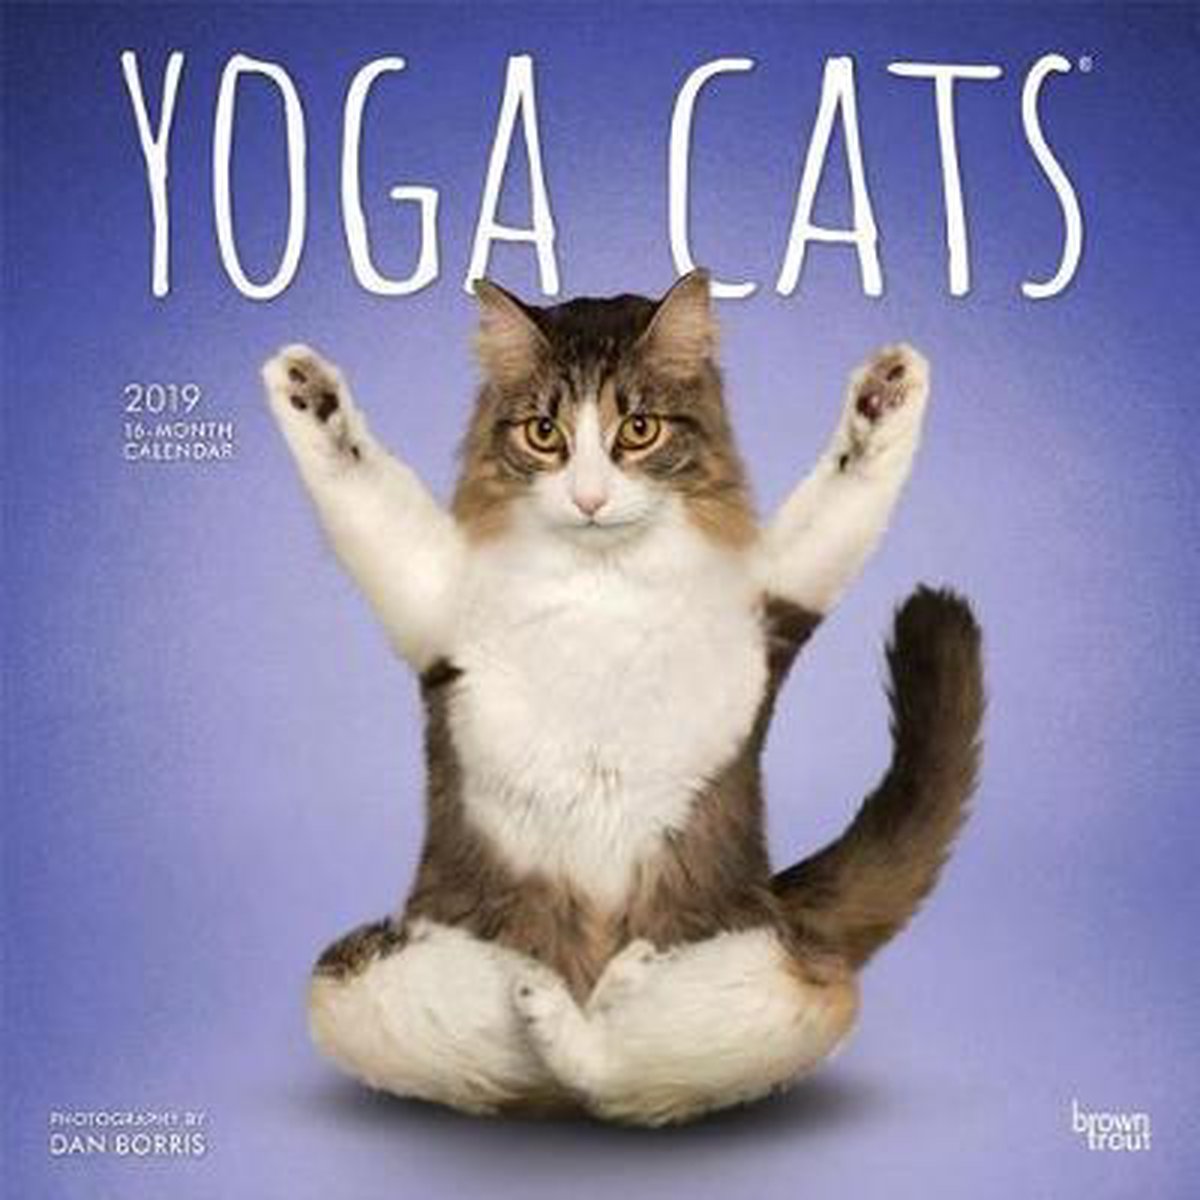 Yoga Cats Kalender 2019 - Inc Browntrout Publishers